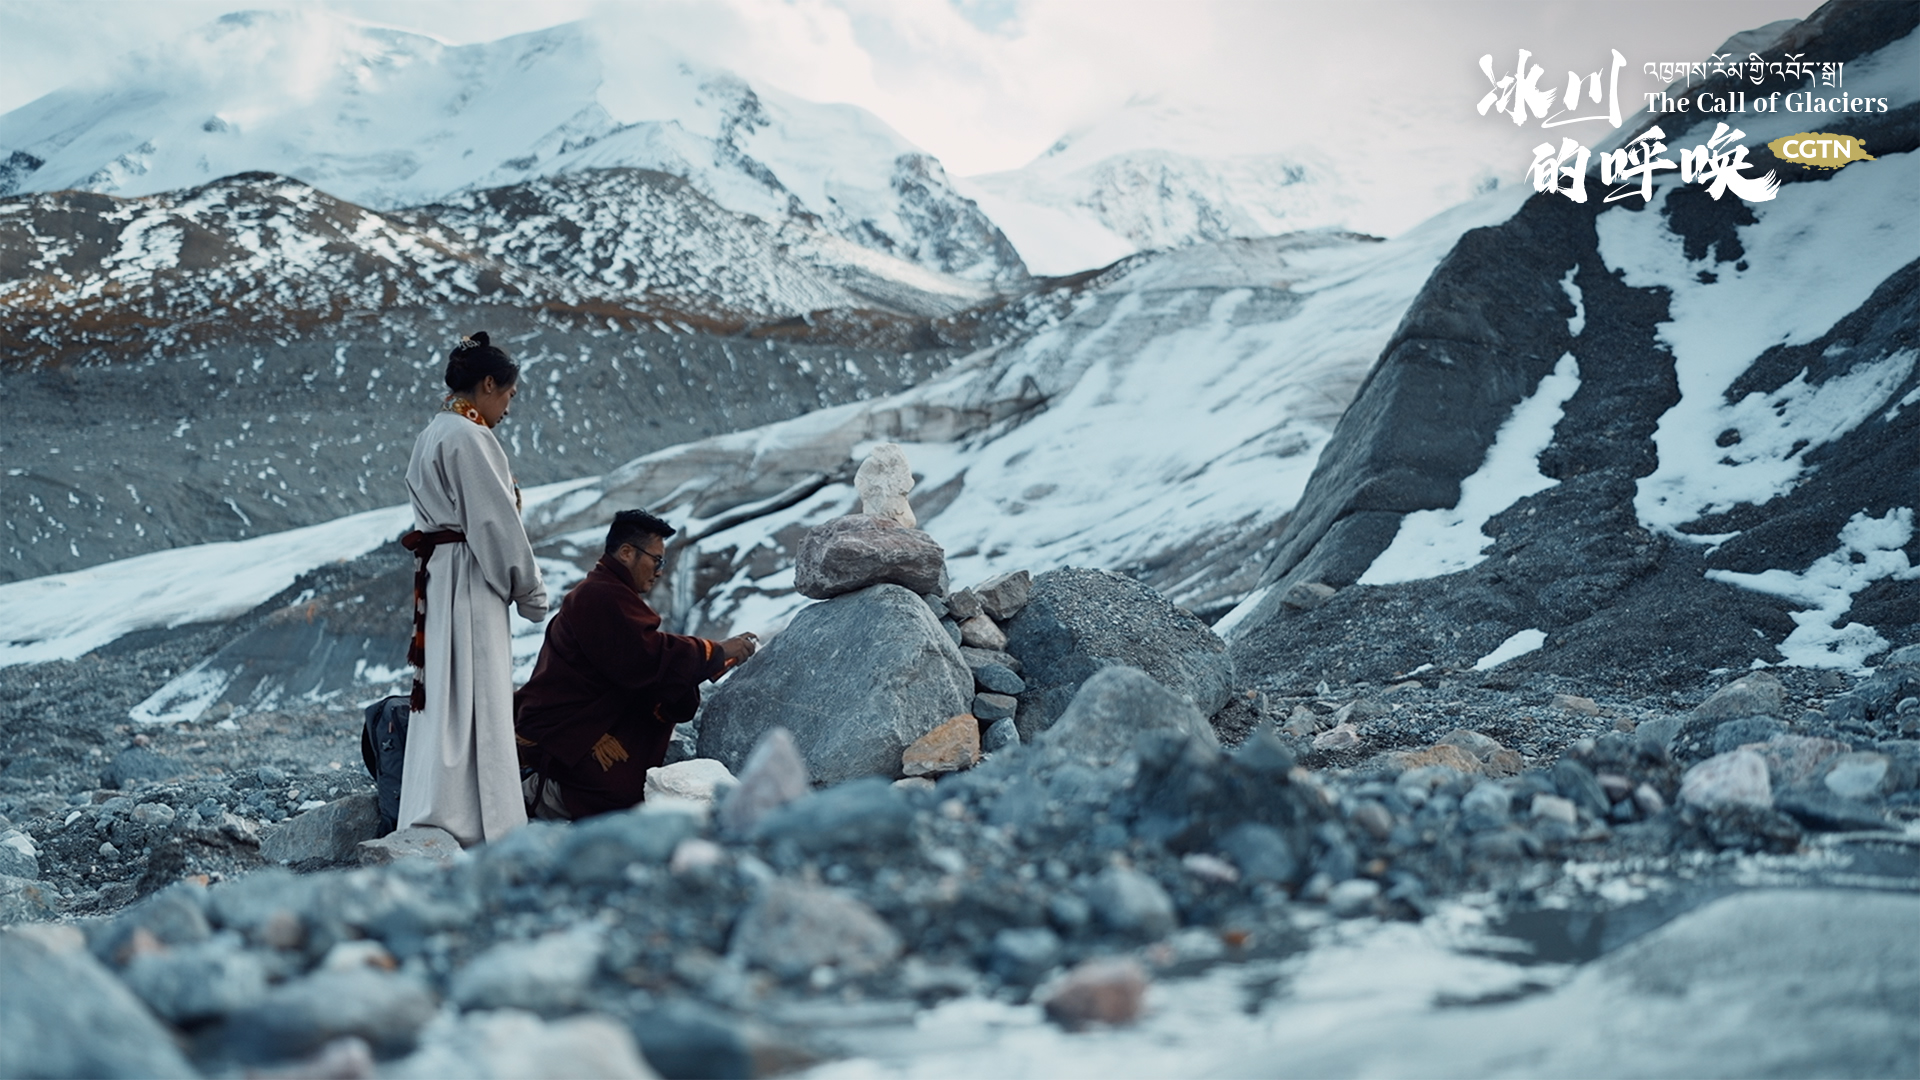 'The Call of Glaciers' wins silver at New York Festivals for TV and Film